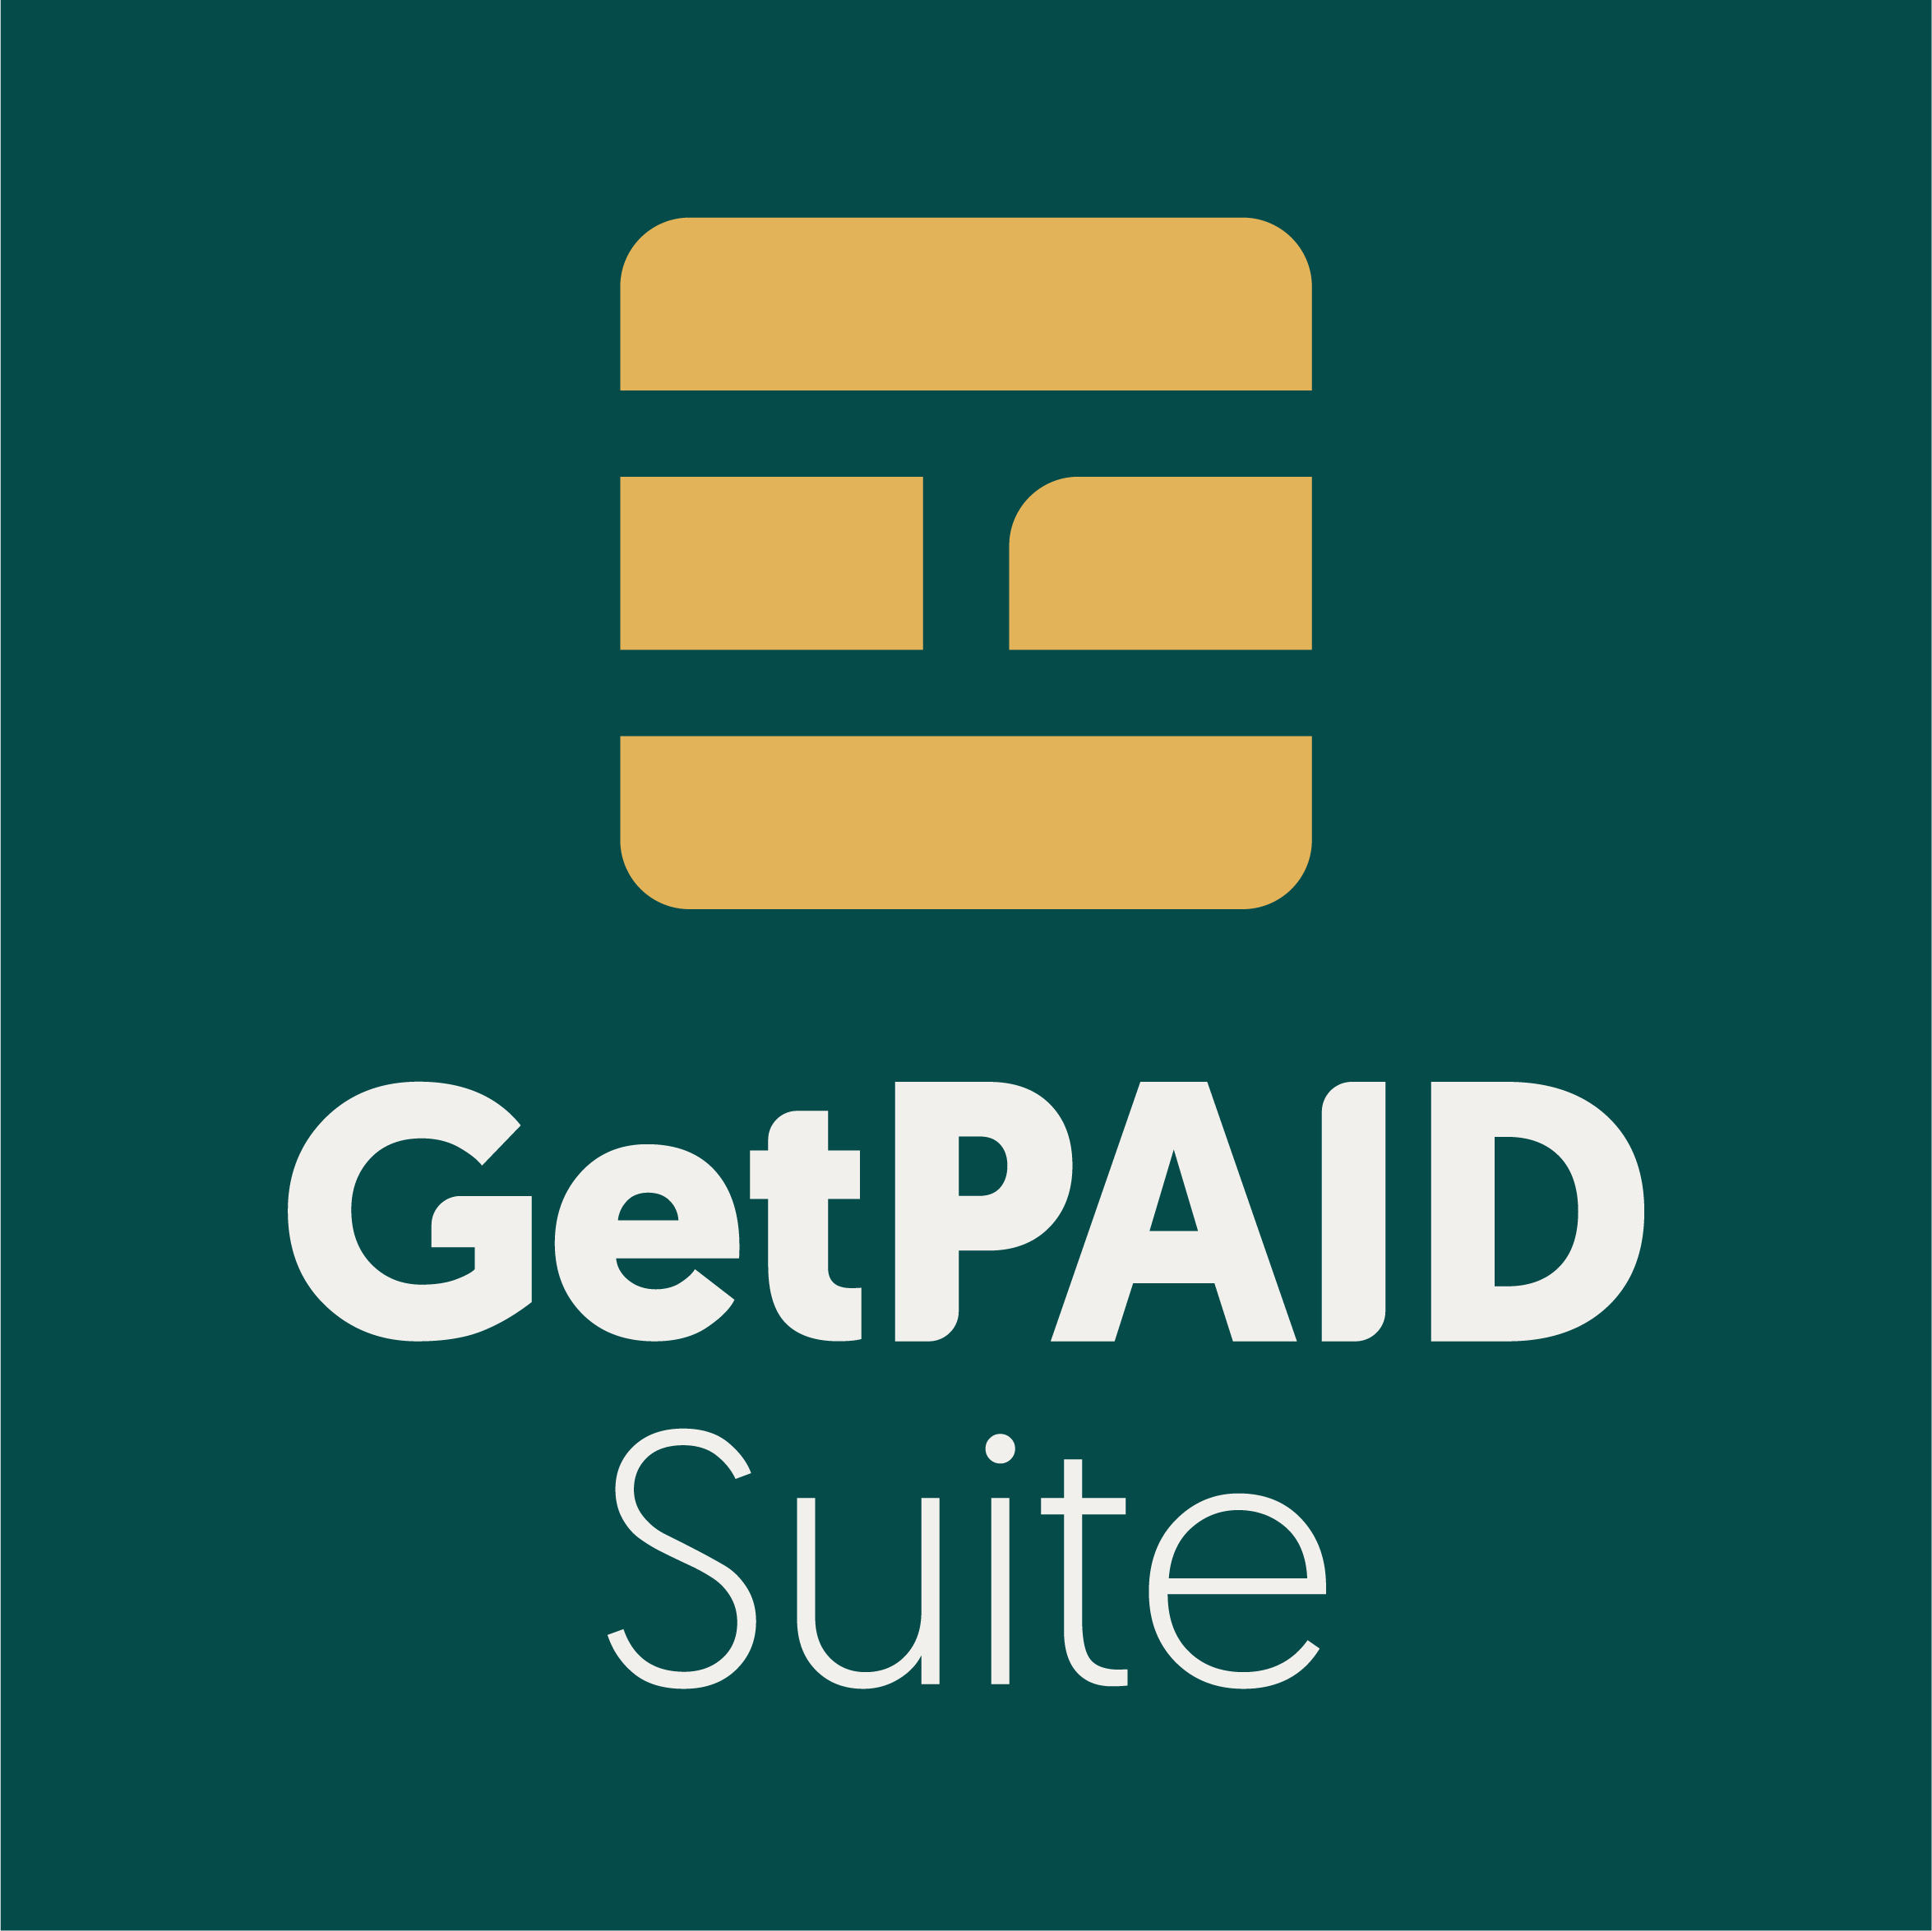 The GetPAID Suite